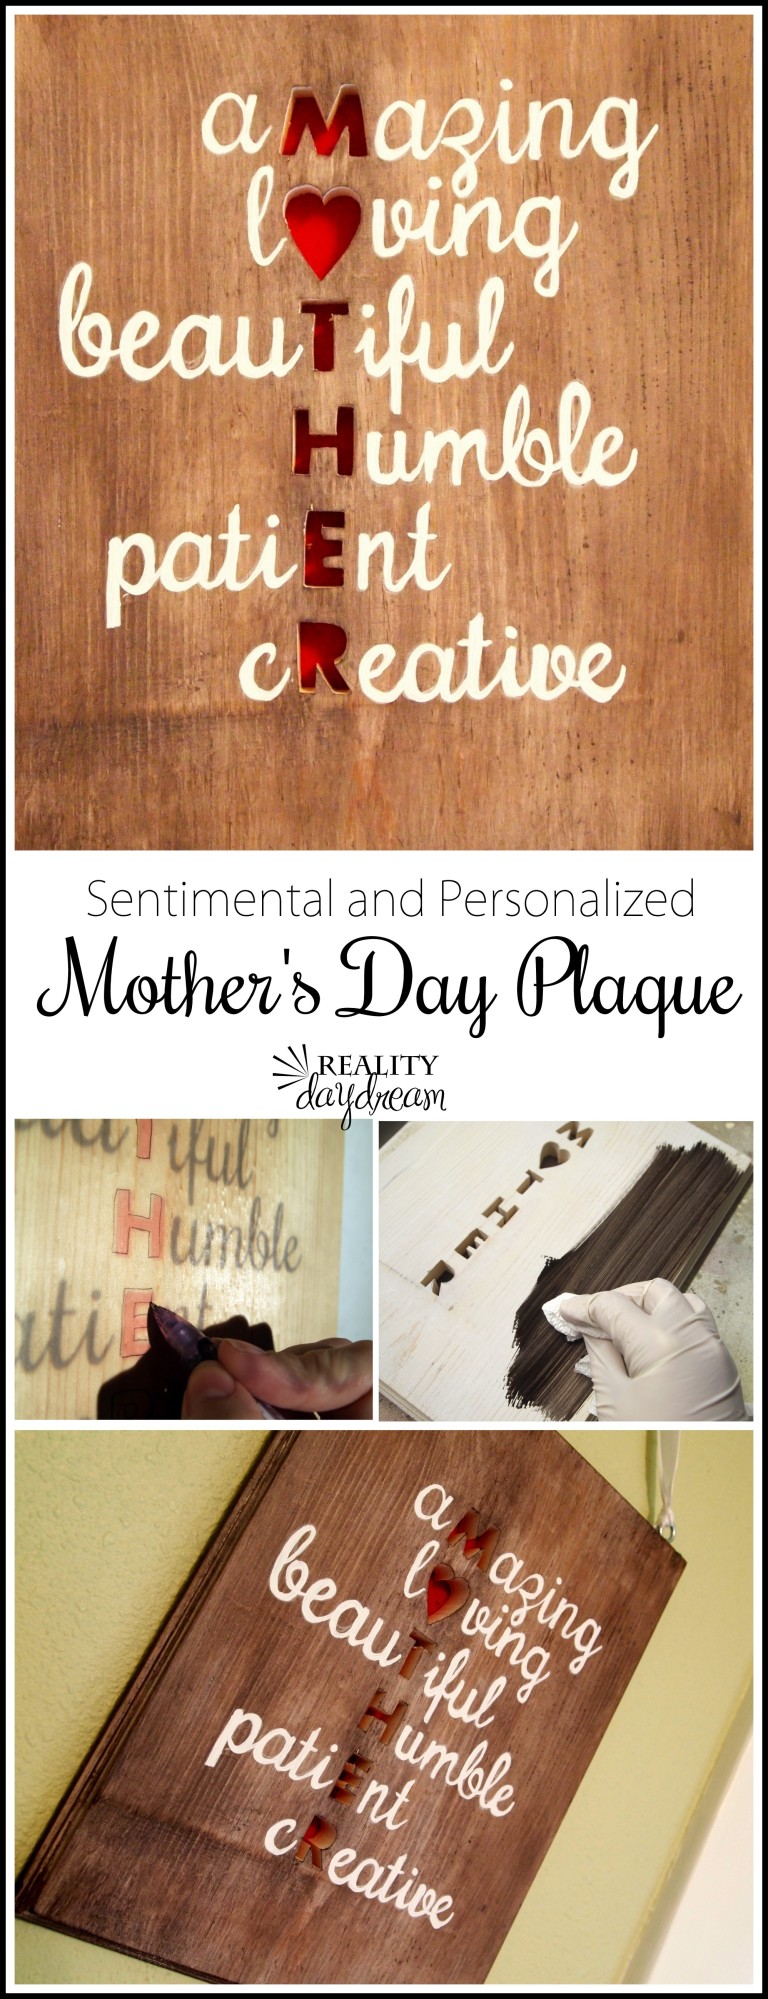 15 Wonderful Last-Minute DIY Mother's Day Gift Ideas In Case You Forgot